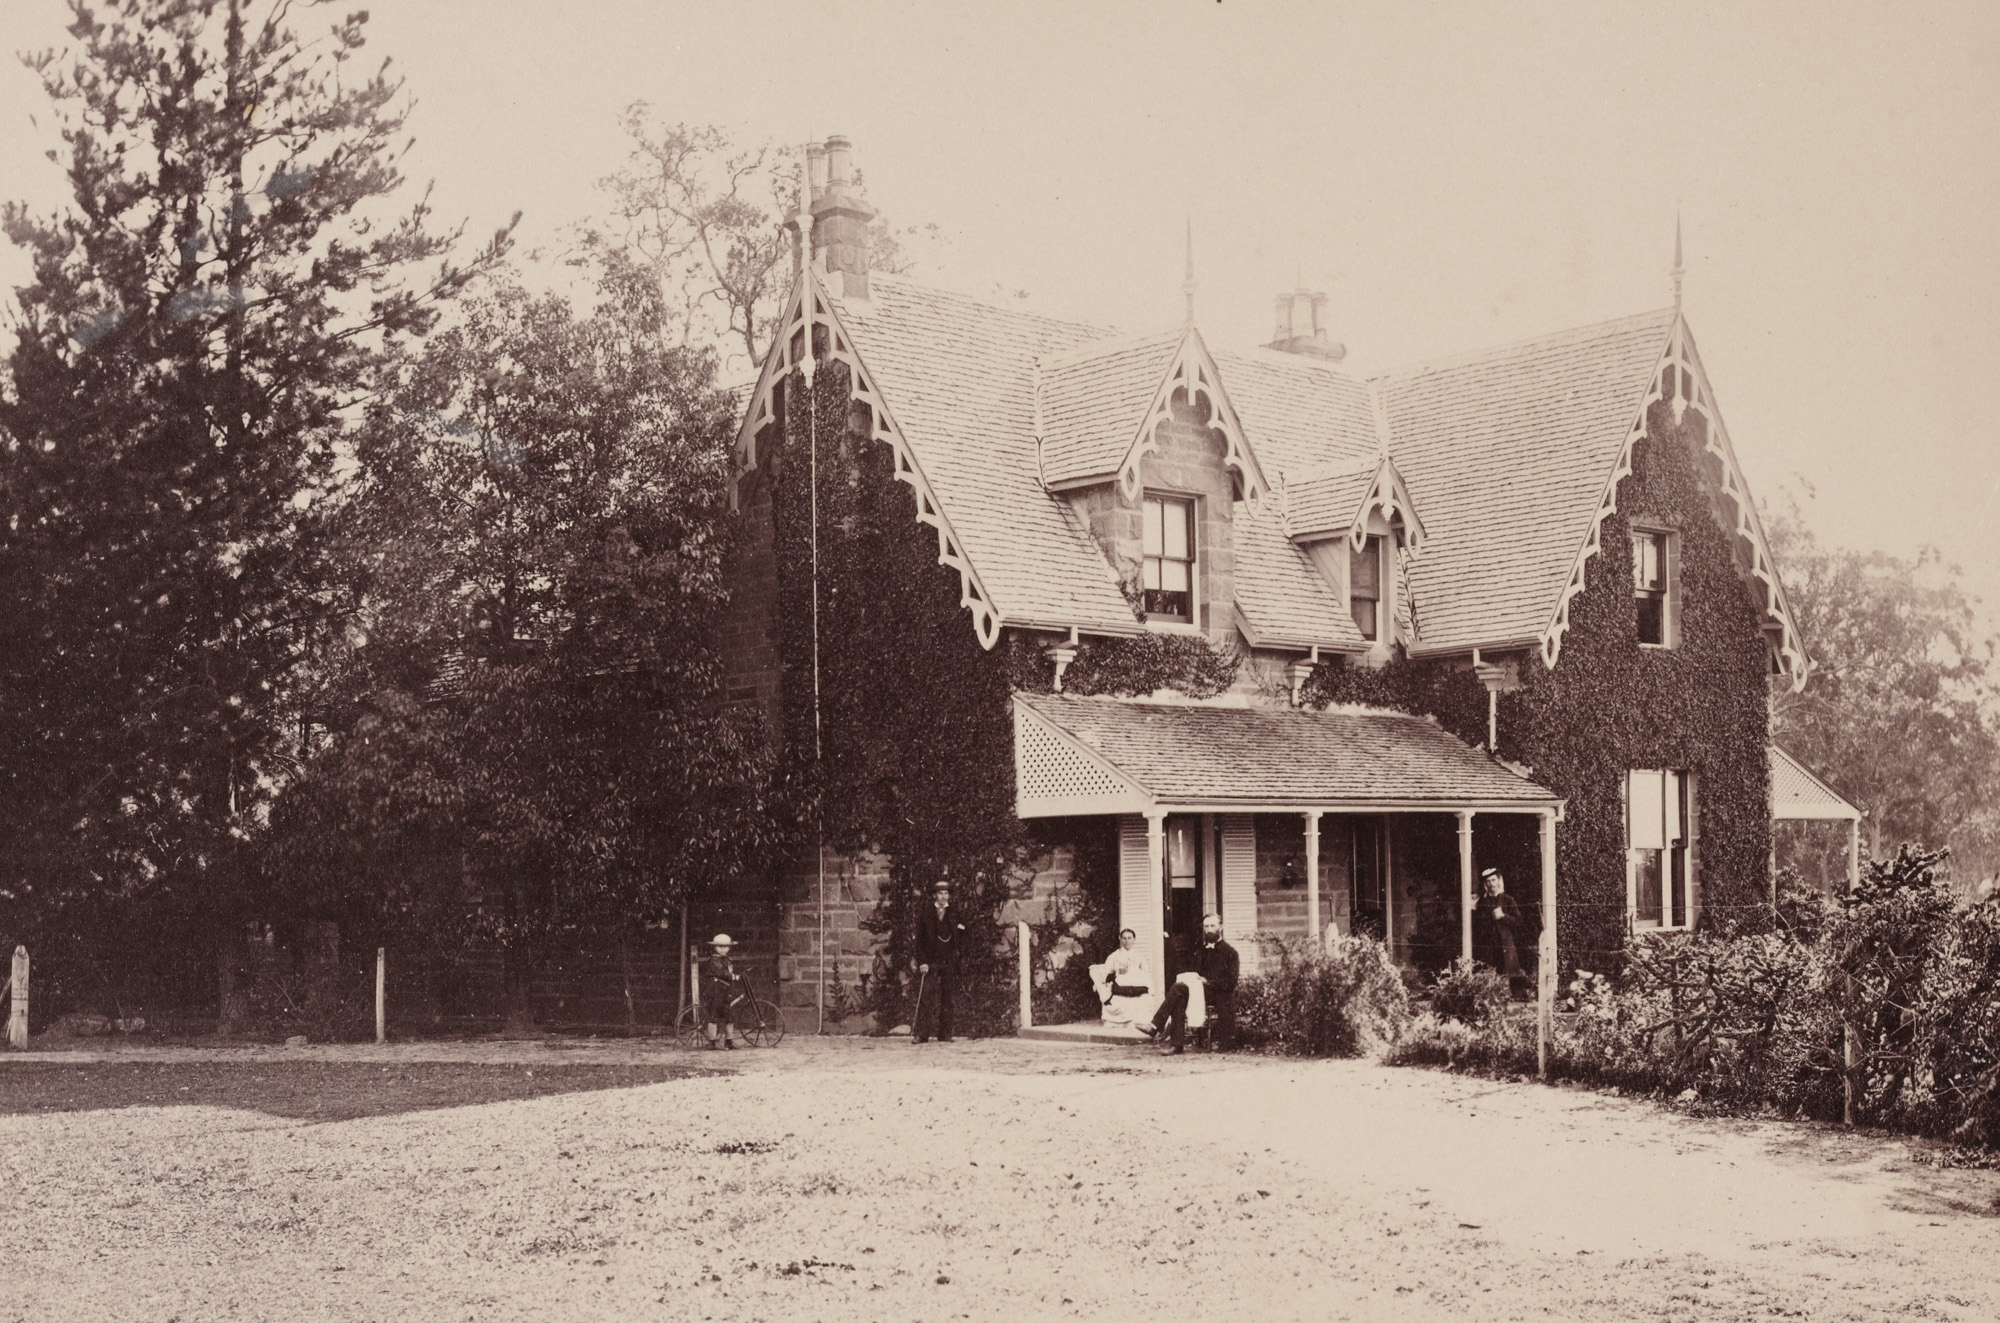 Reverend Arthur Wellesley Pain and members of his family at the Parsonage, Cobbitty, c1877 / photographer unknown